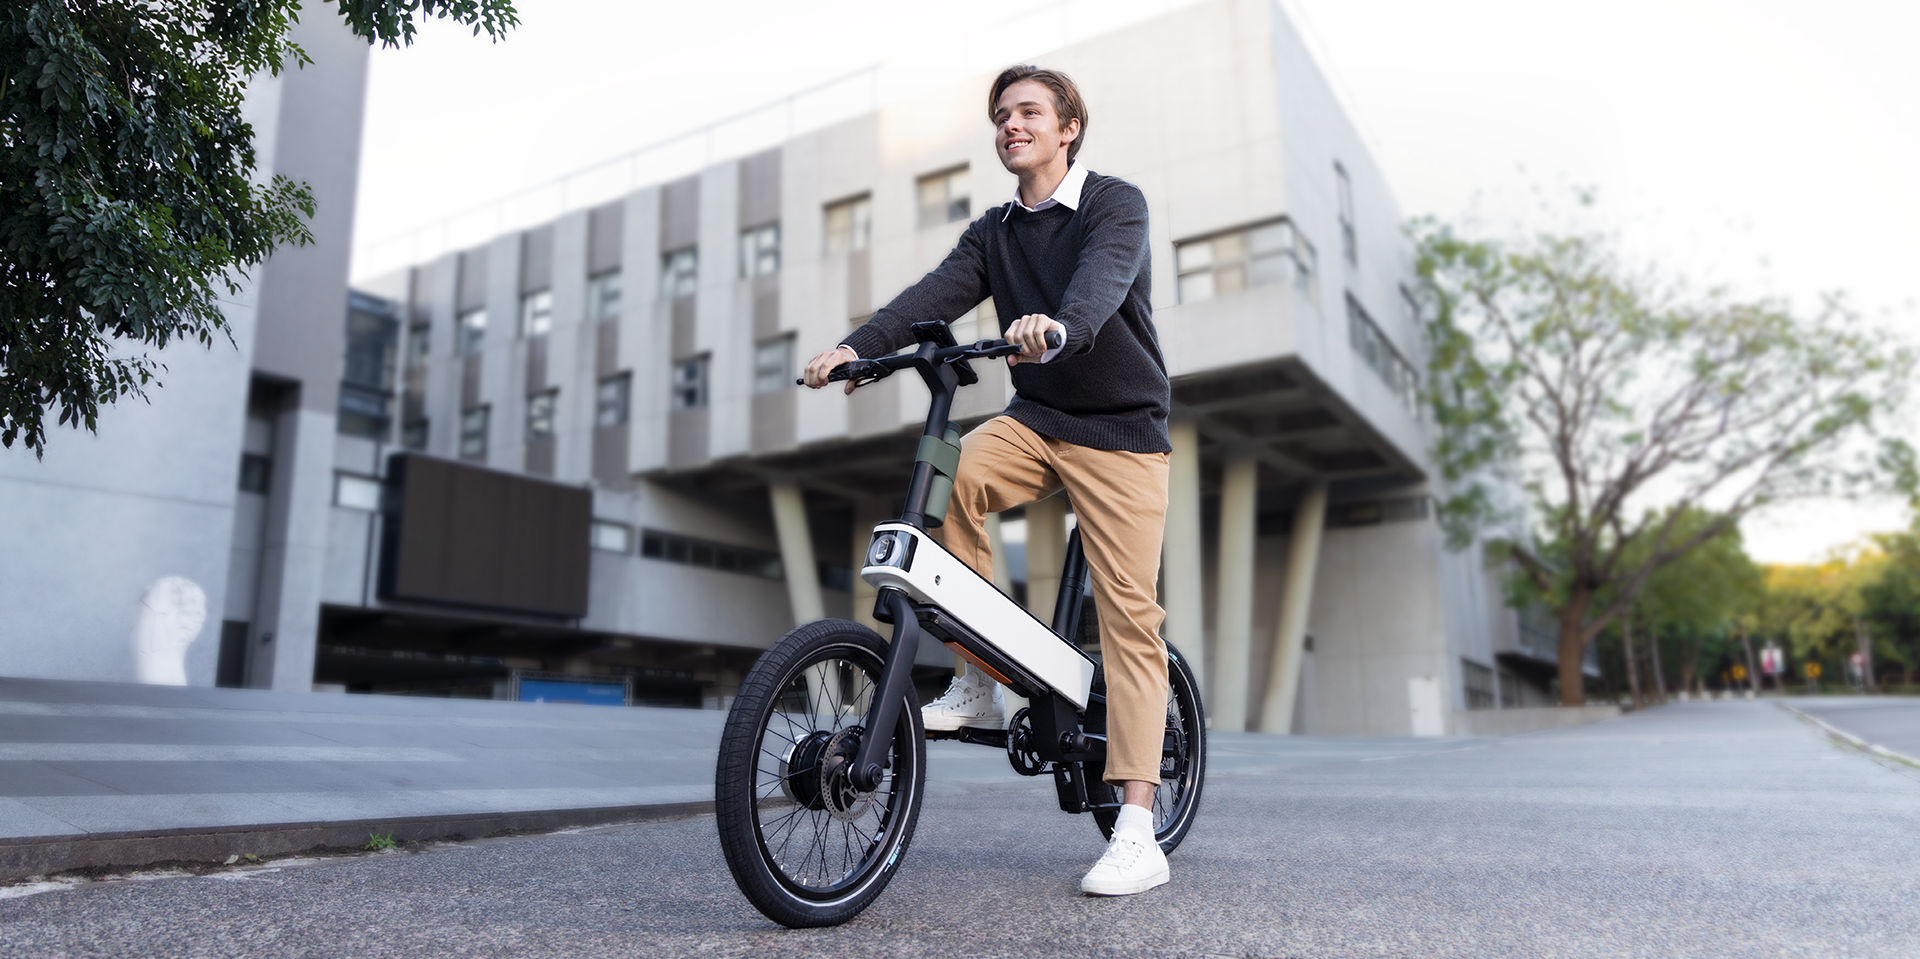 Acer ebii: an electric bike with artificial intelligence for safe riding